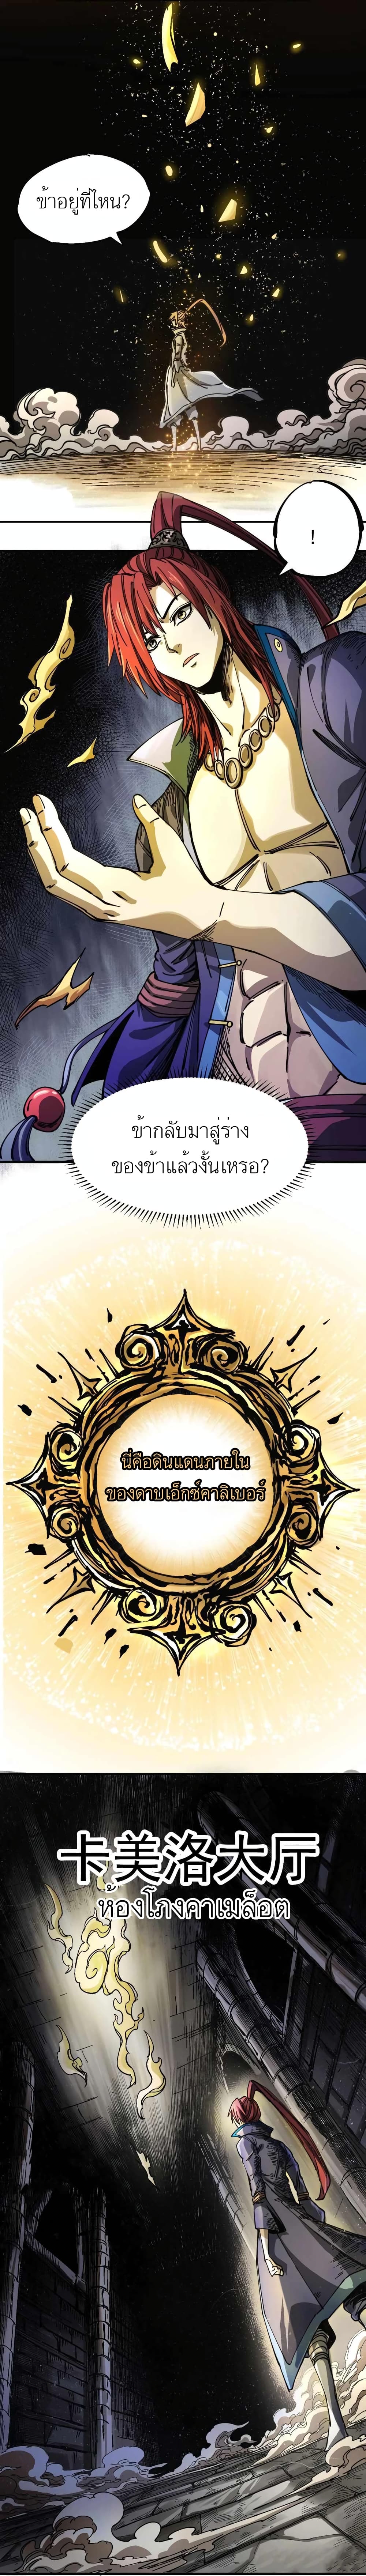 The Story of a Cursed Armor ตอนที่ 3 (12)